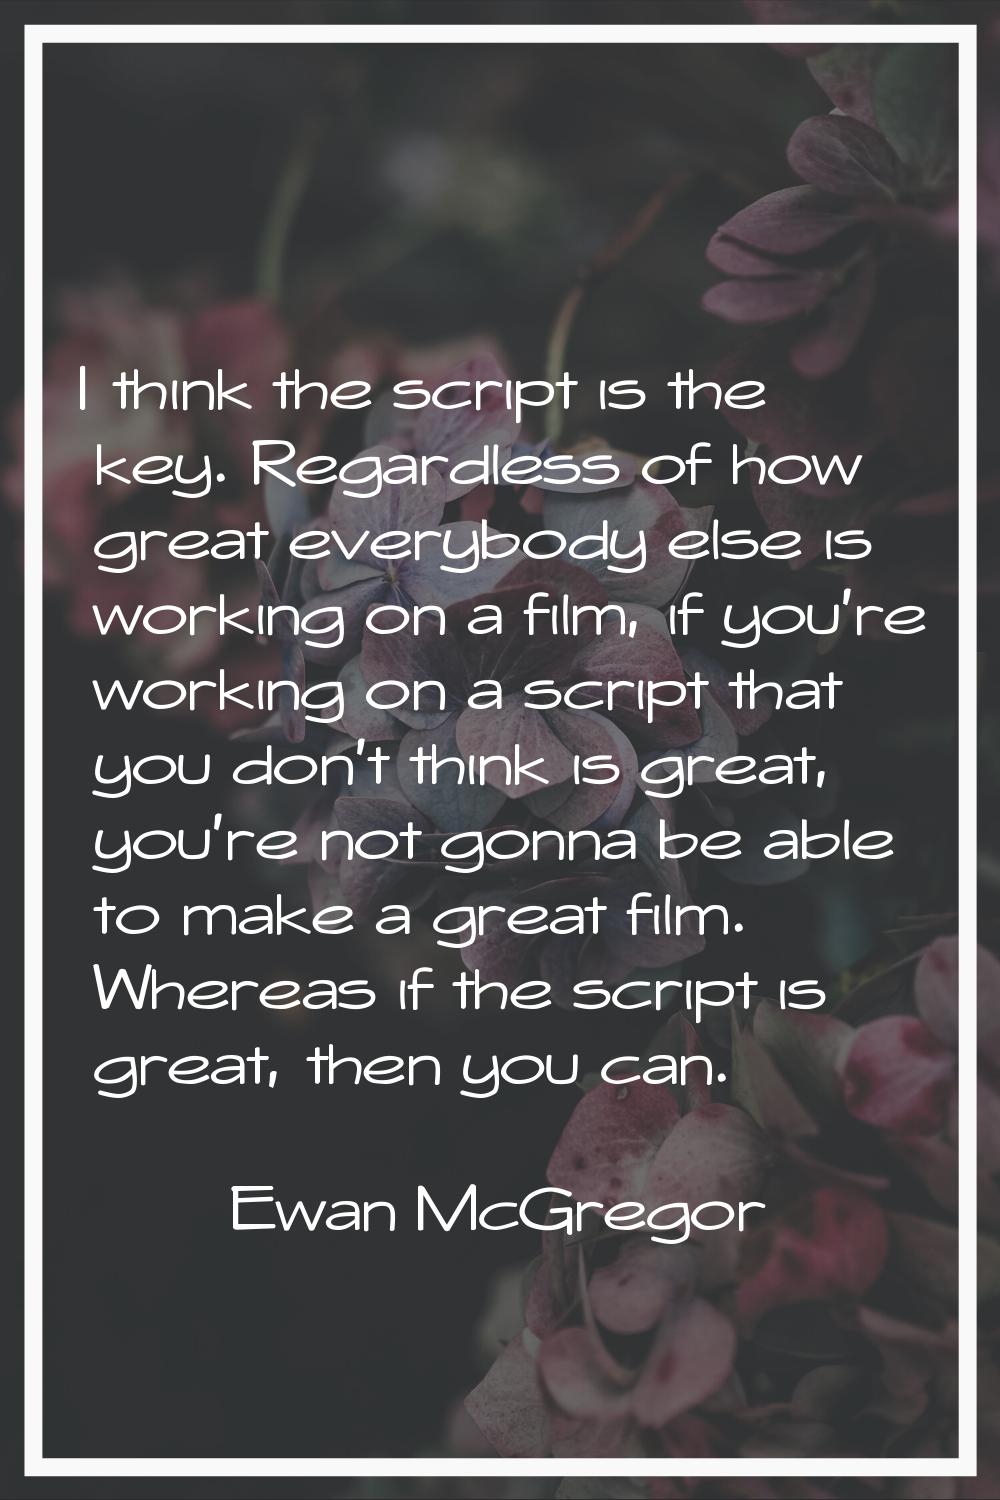 I think the script is the key. Regardless of how great everybody else is working on a film, if you'